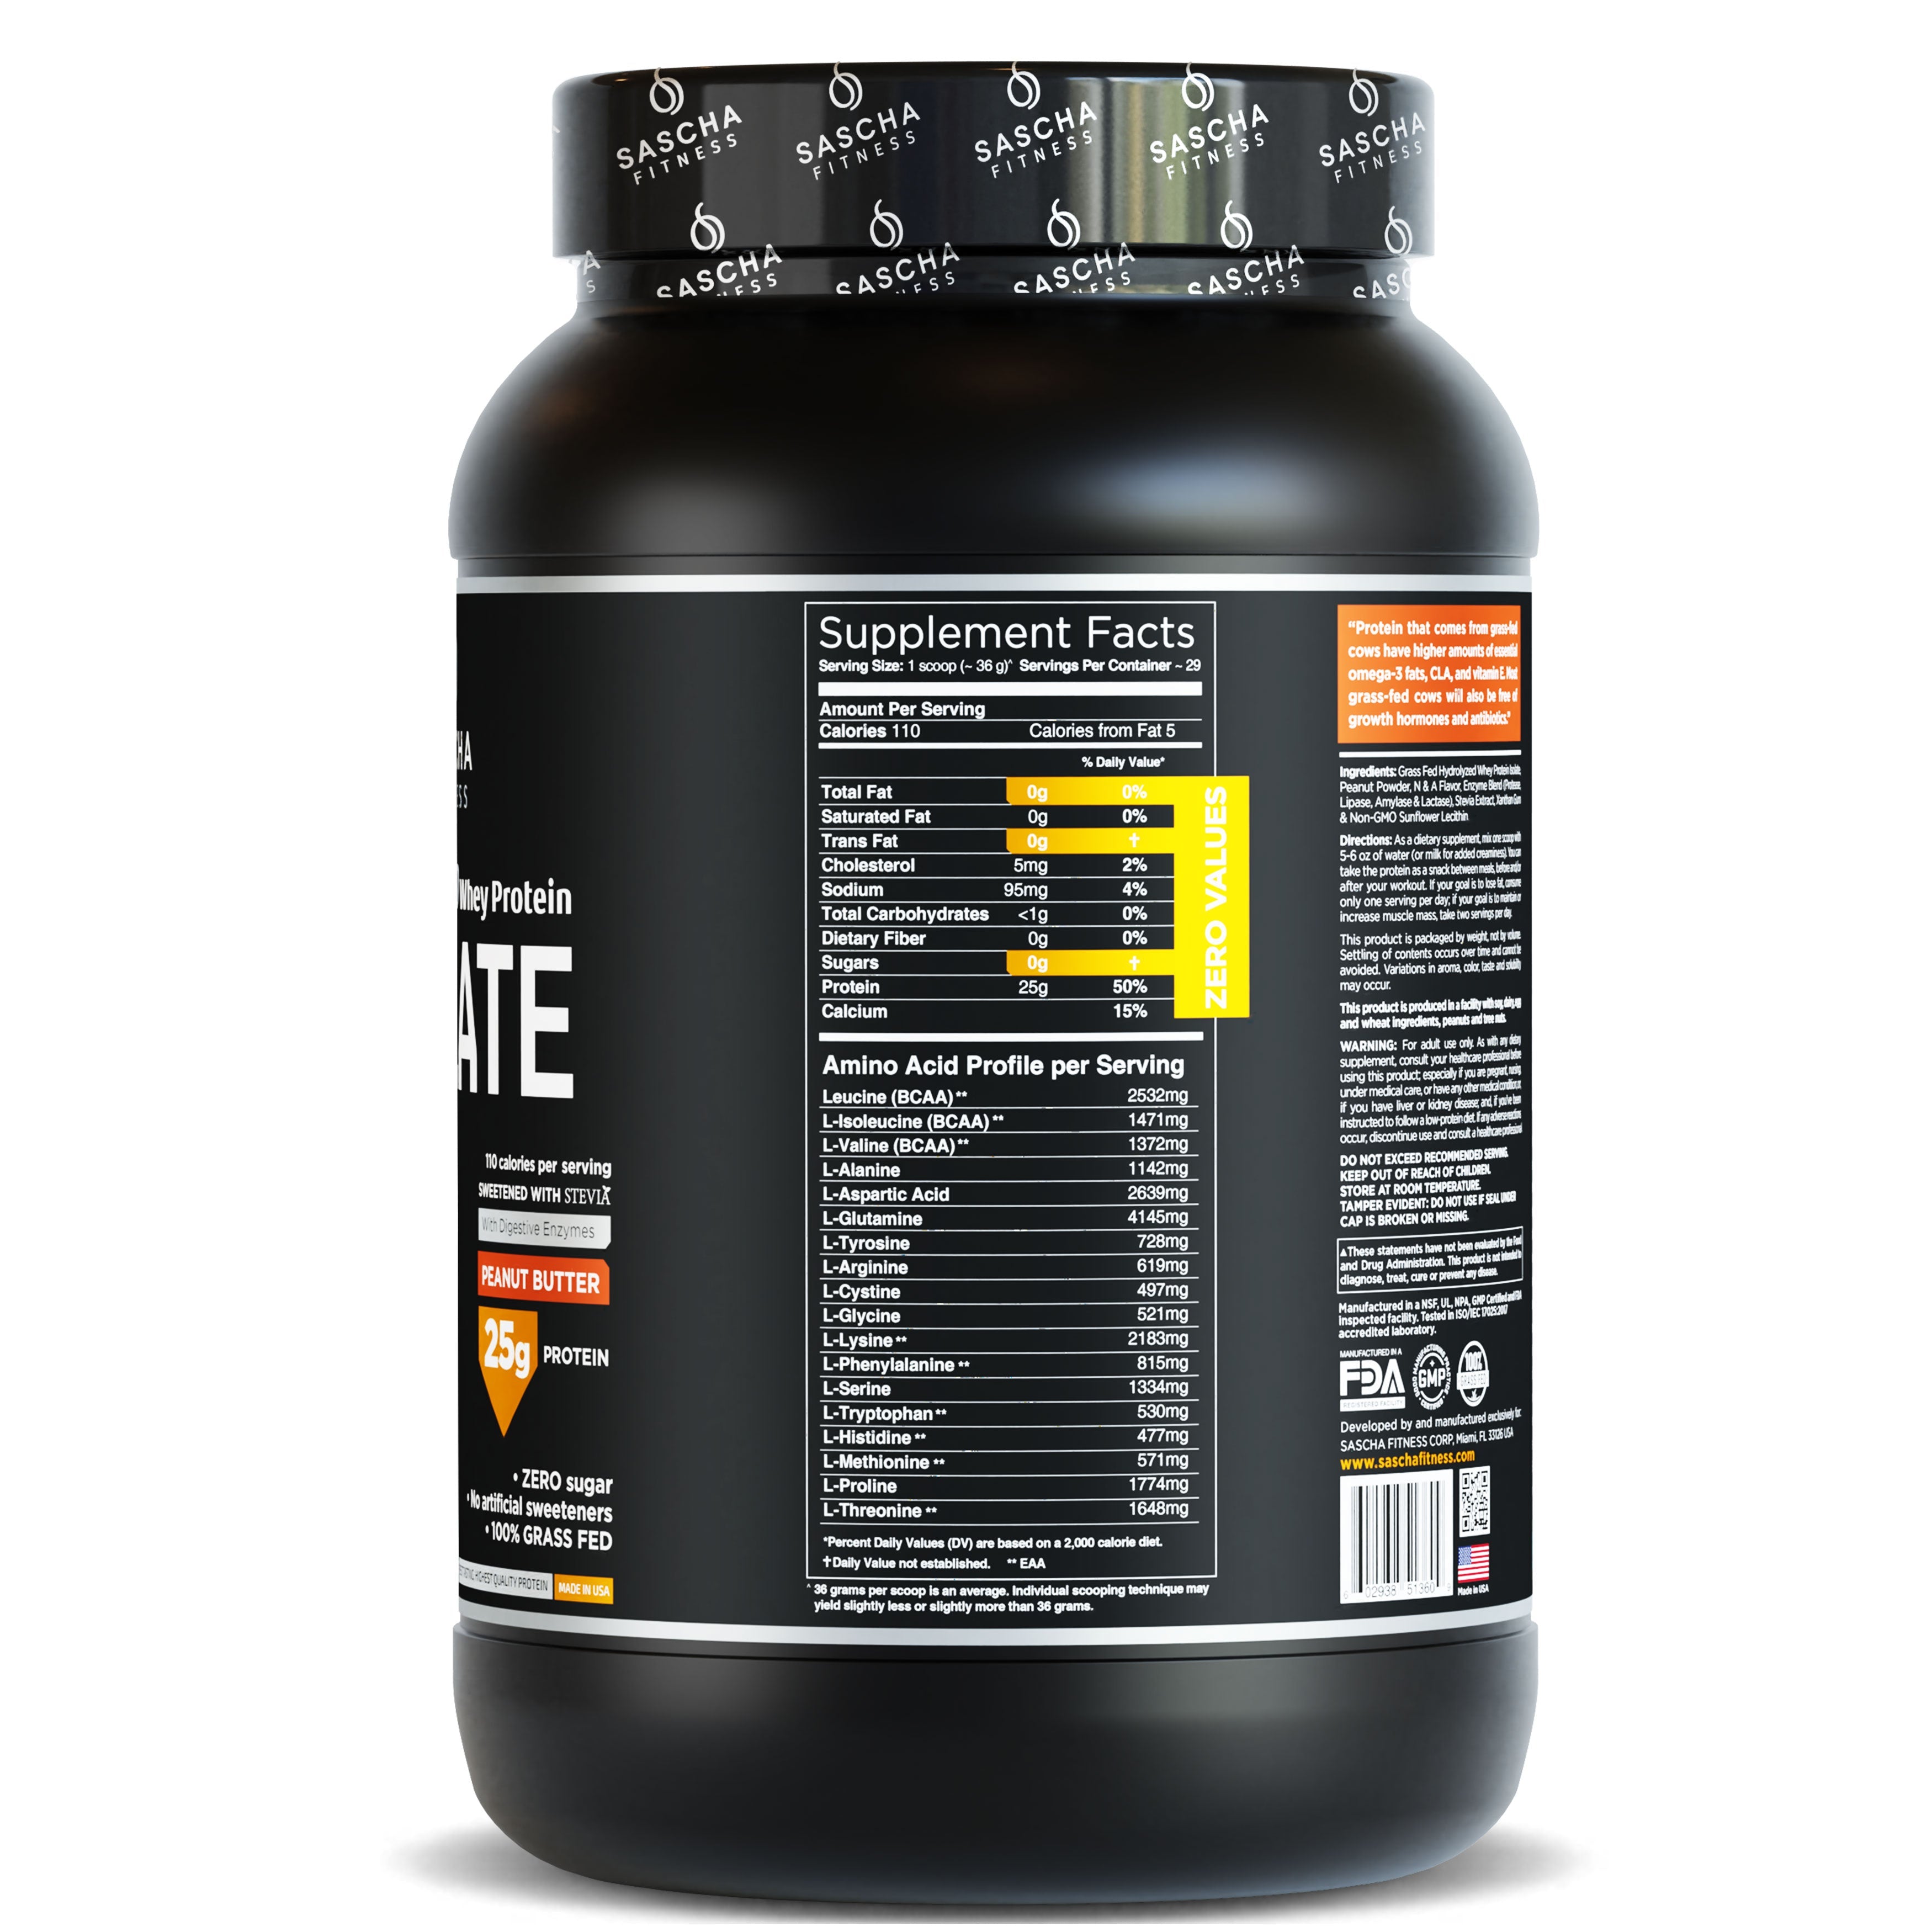 Hydrolyzed Whey Protein Isolate Peanut Butter